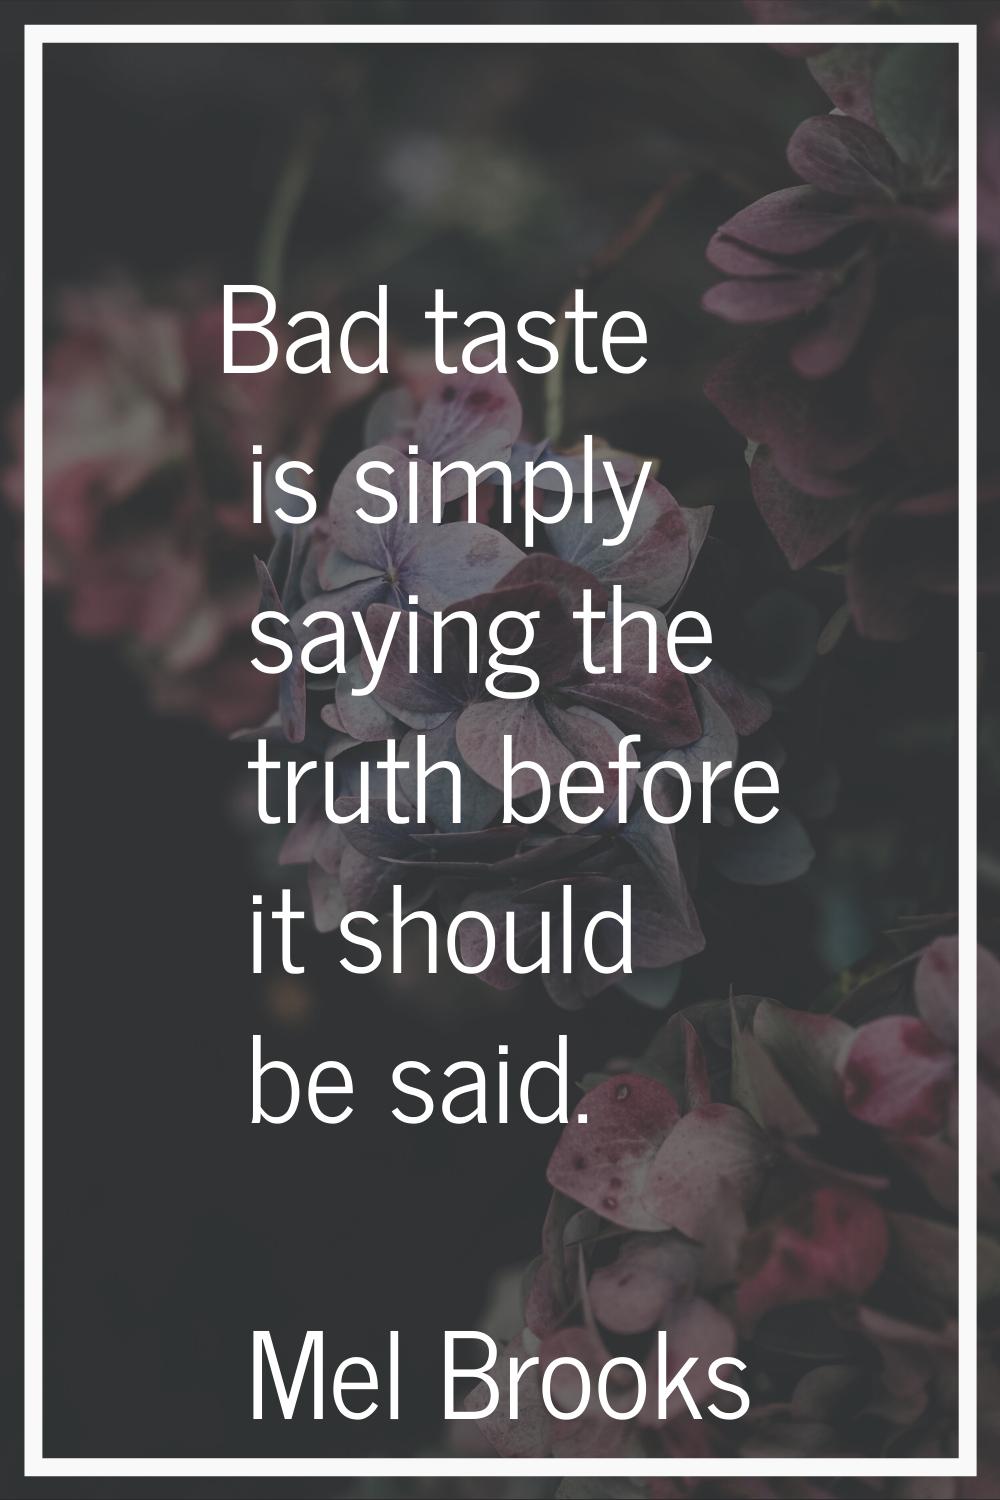 Bad taste is simply saying the truth before it should be said.